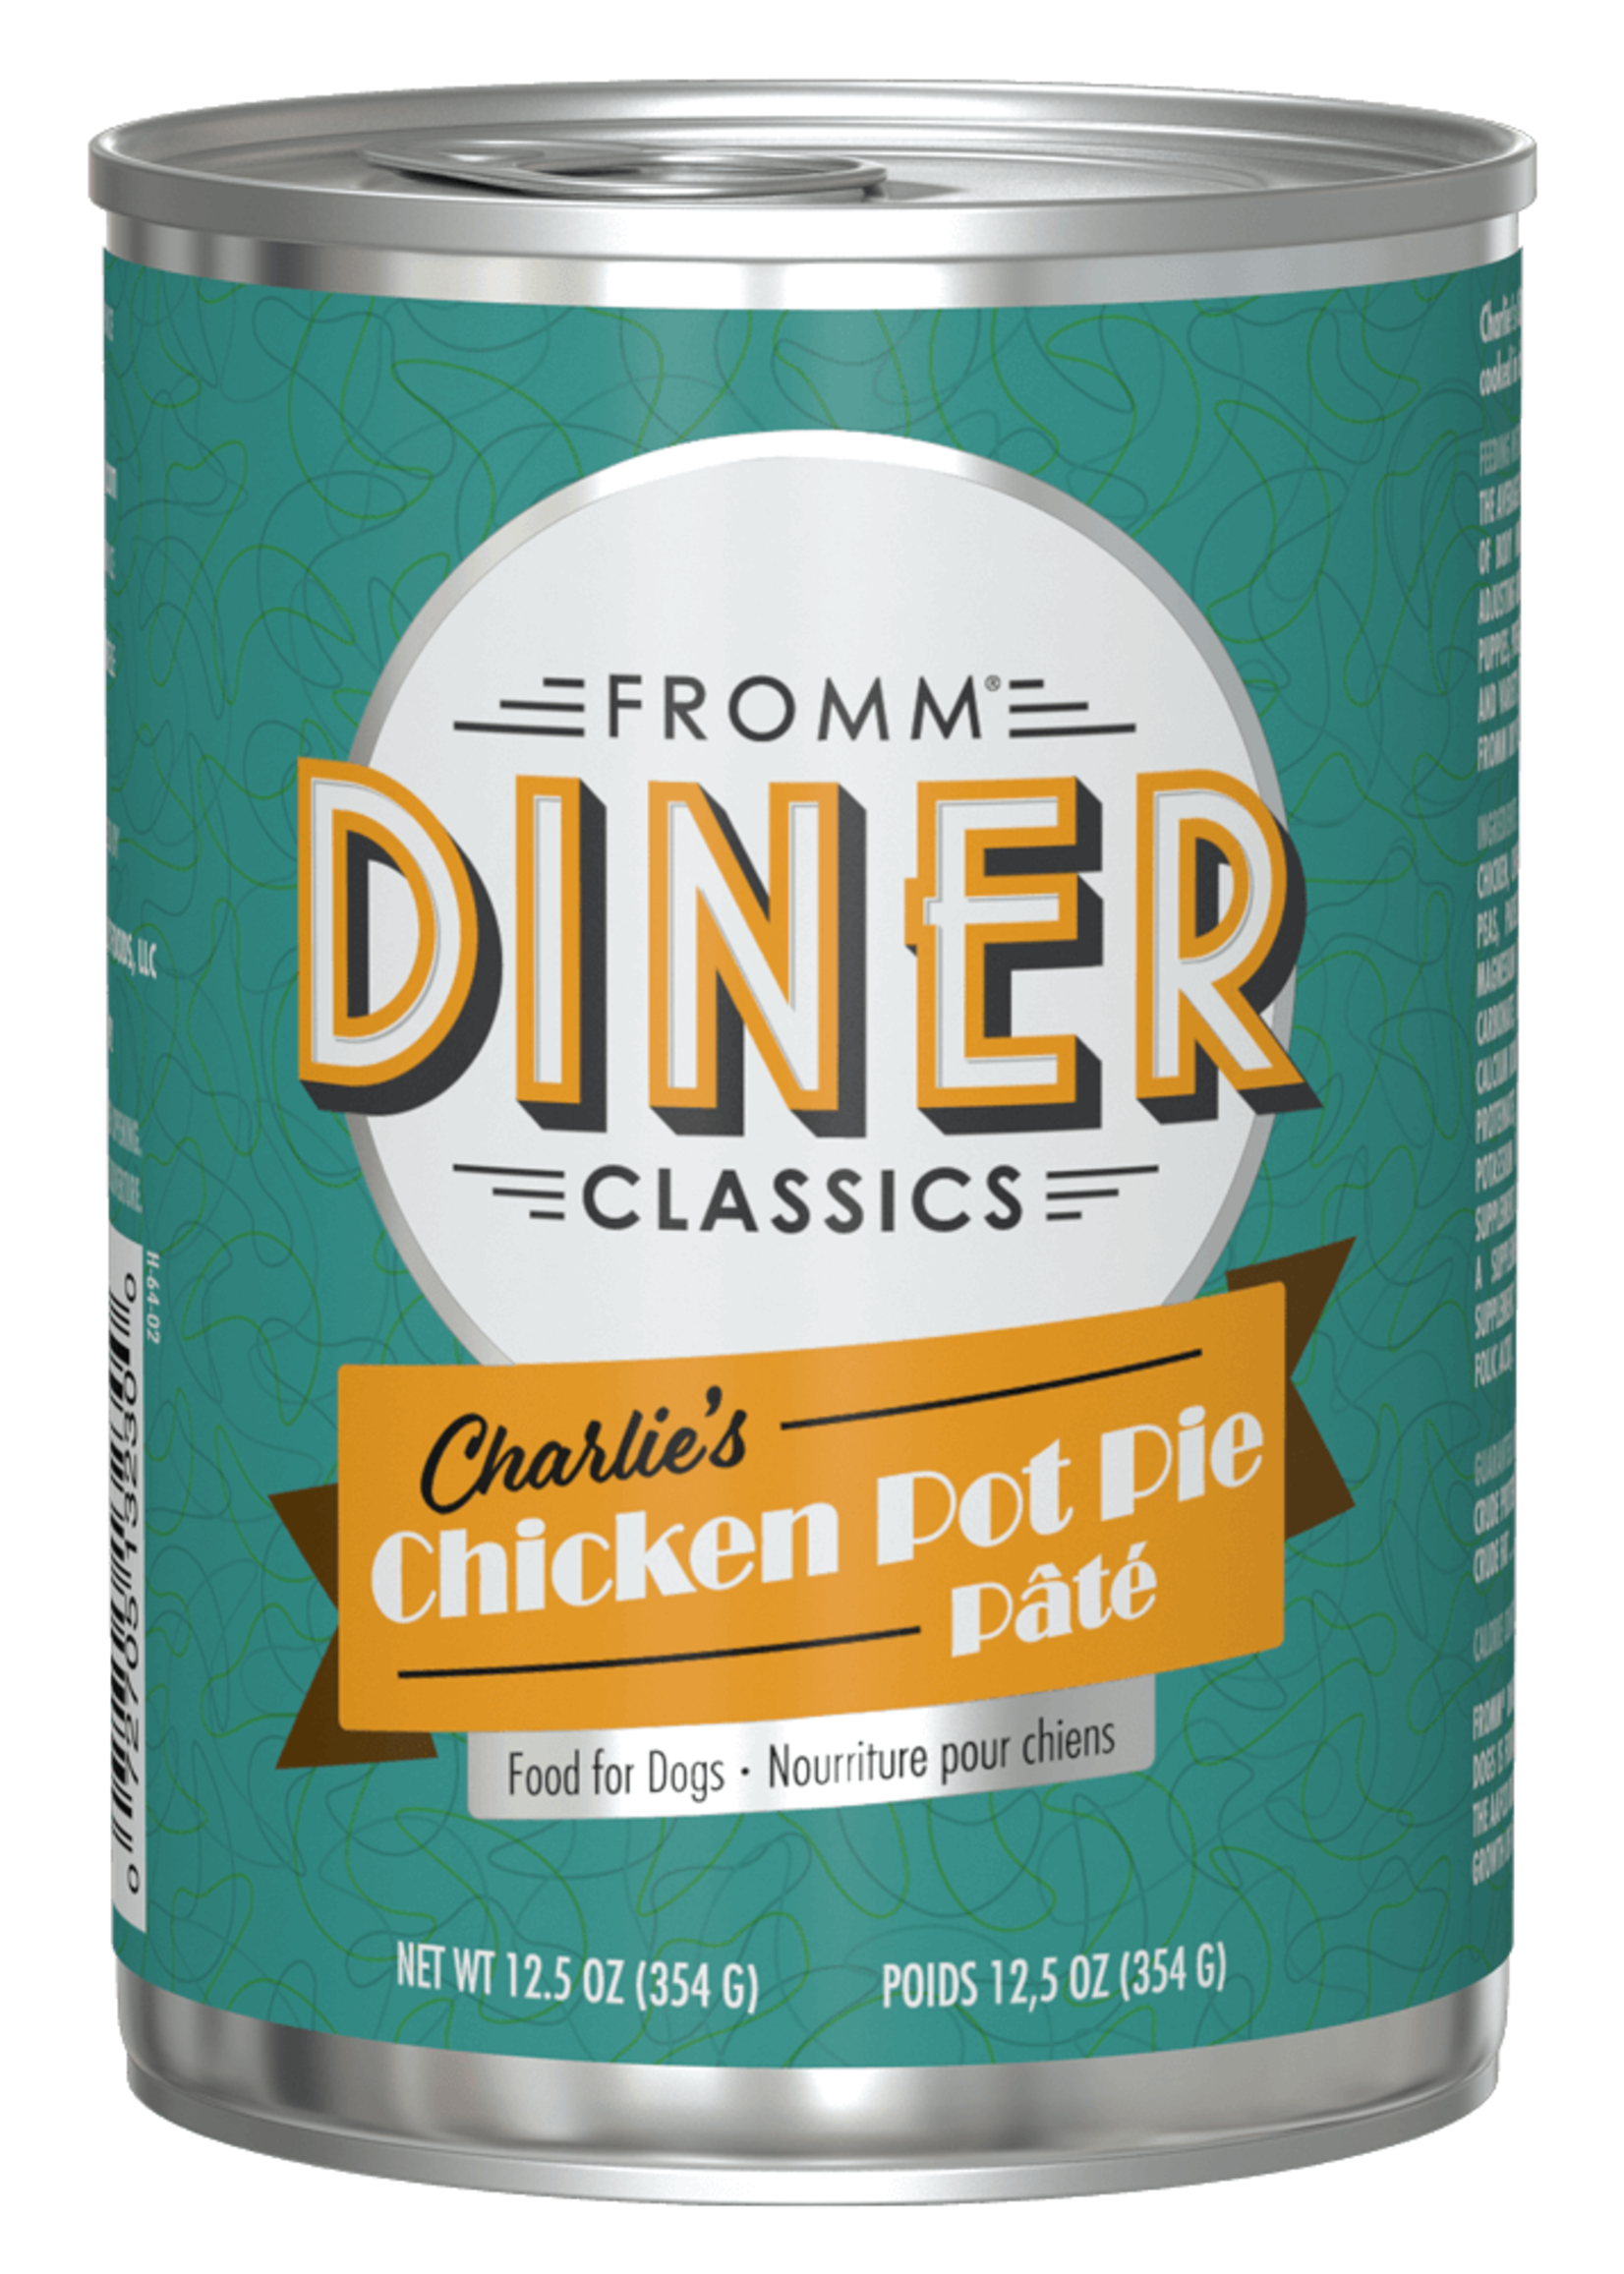 Fromm Family Pet Food Fromm Dog Diner classics Charlie's Chicken Pot Pie Pate 12.5 oz single